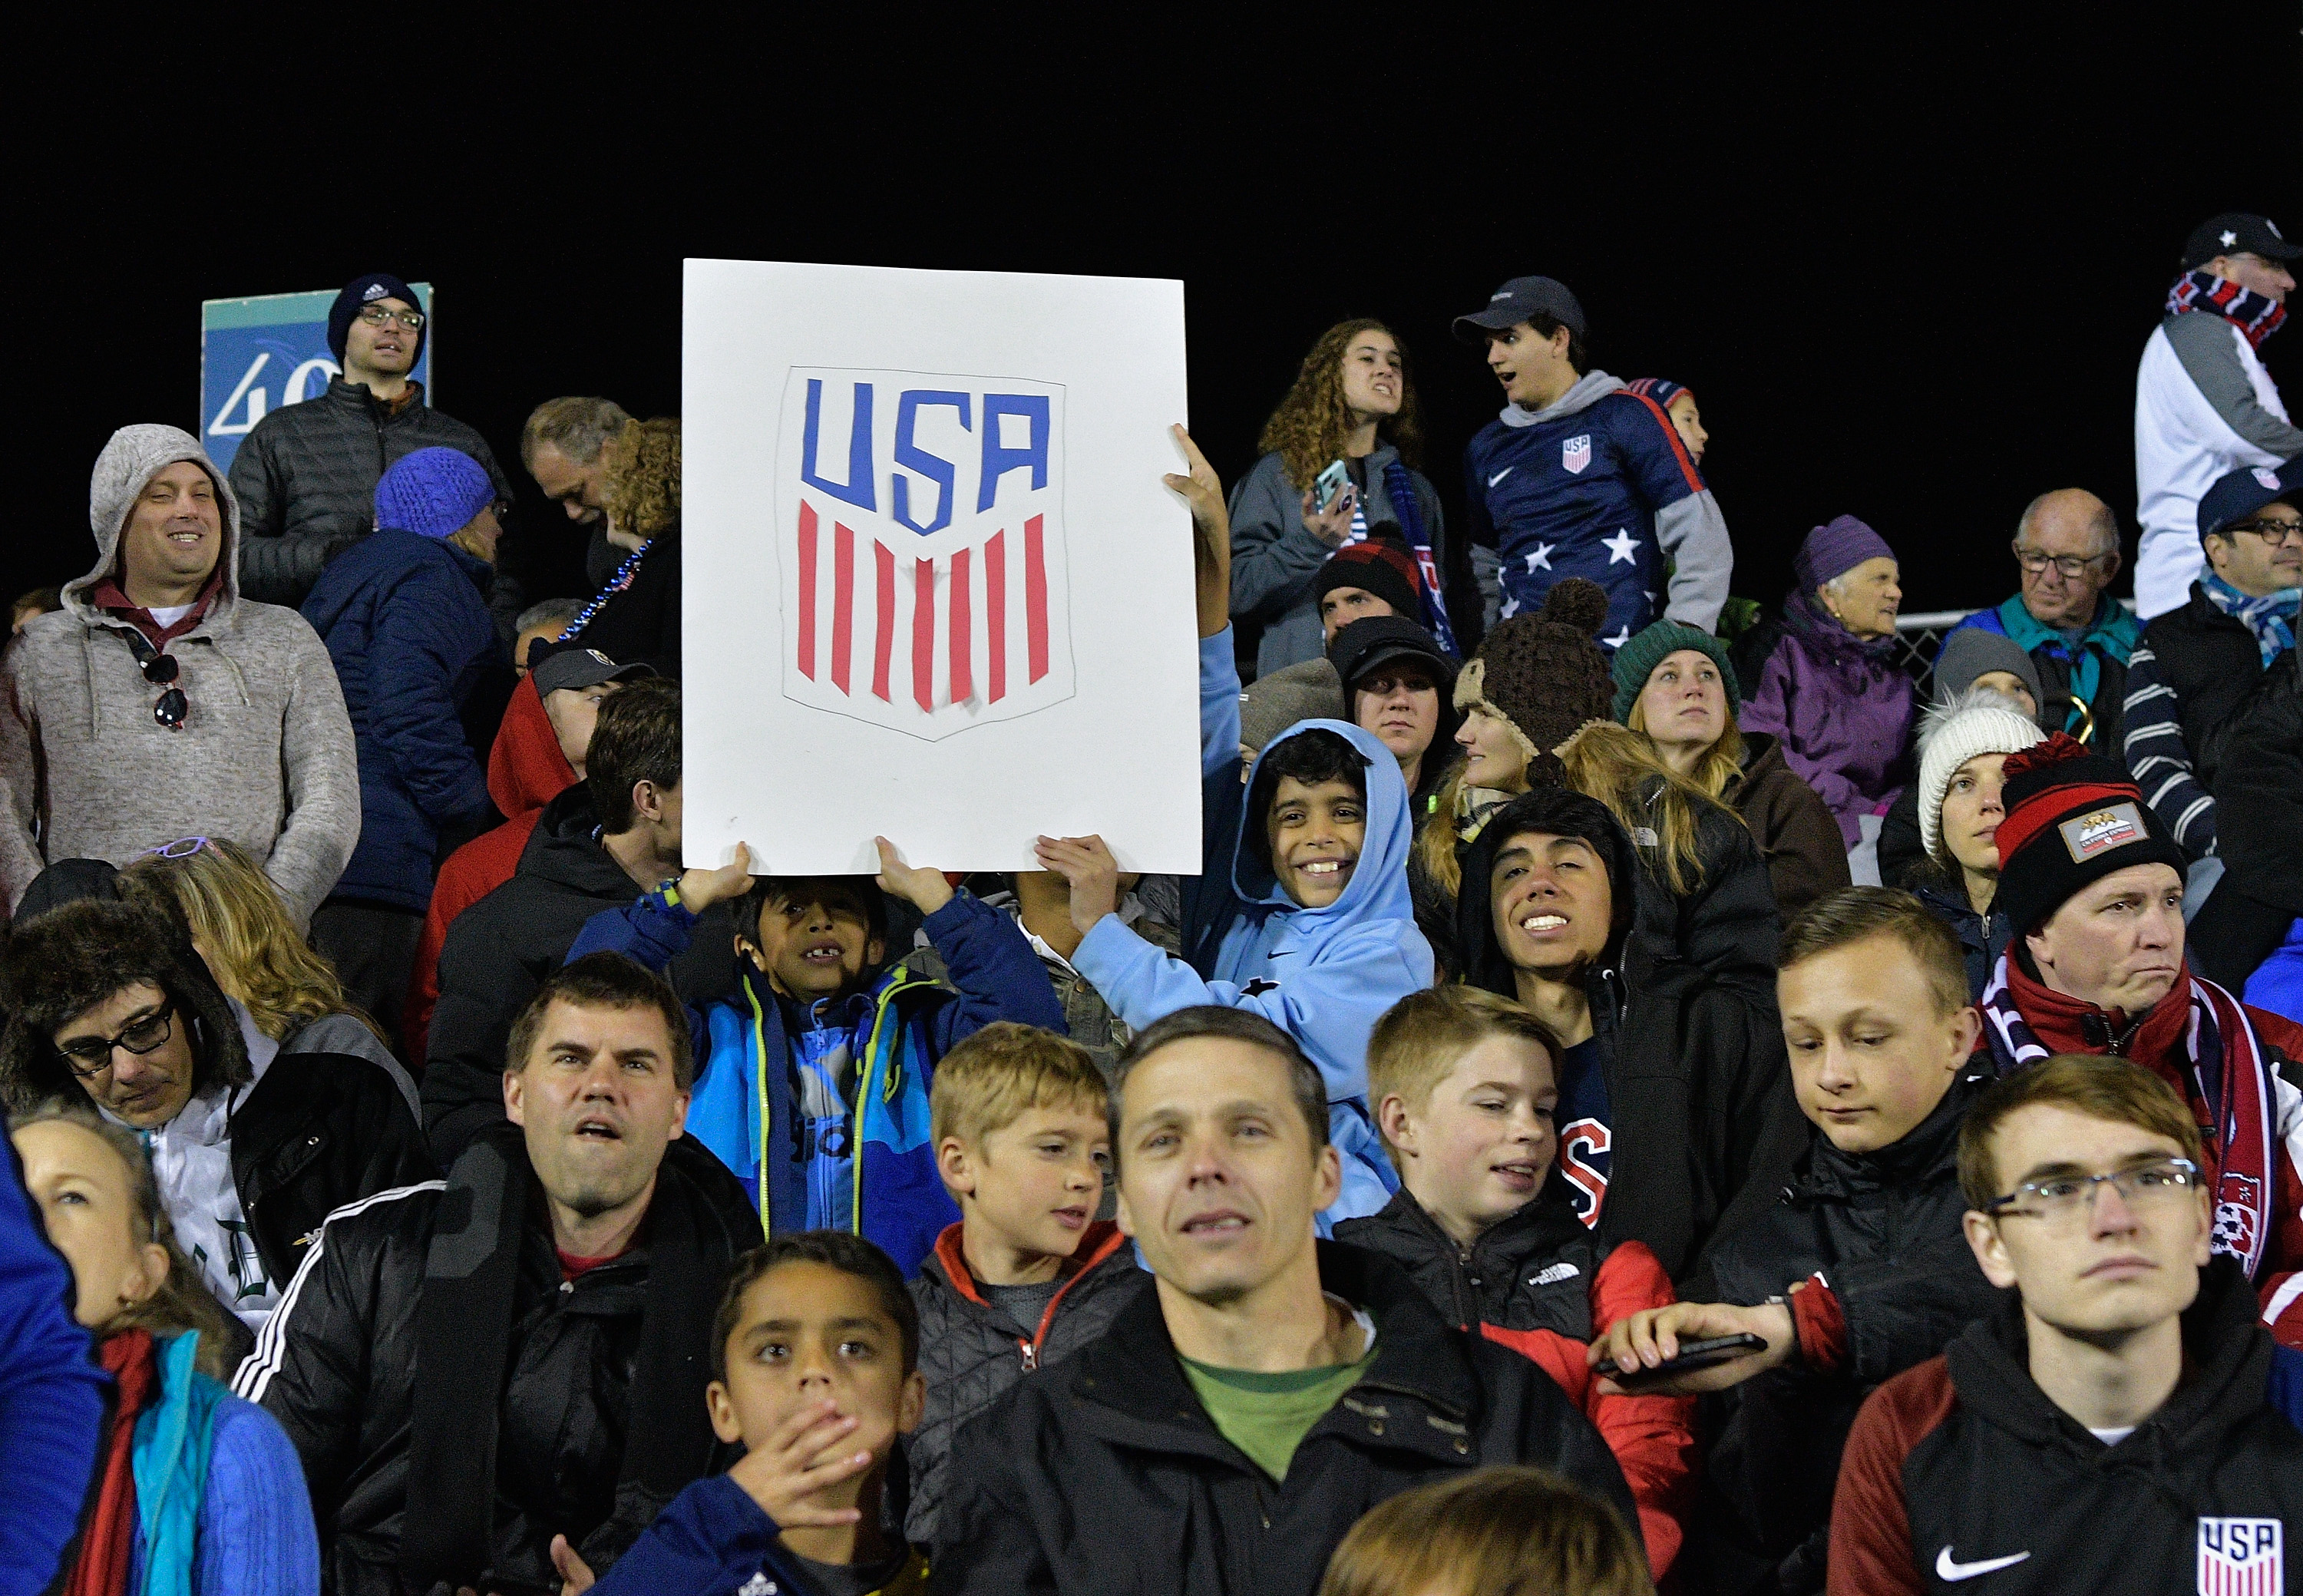 CARY, NC - MARCH 27:  Fans cheer during the game between the United States and Paraguay at WakeMed Soccer Park on March 27, 2018 in Cary, North Carolina. The United States won 1-0.  (Photo by Grant Halverson/Getty Images)